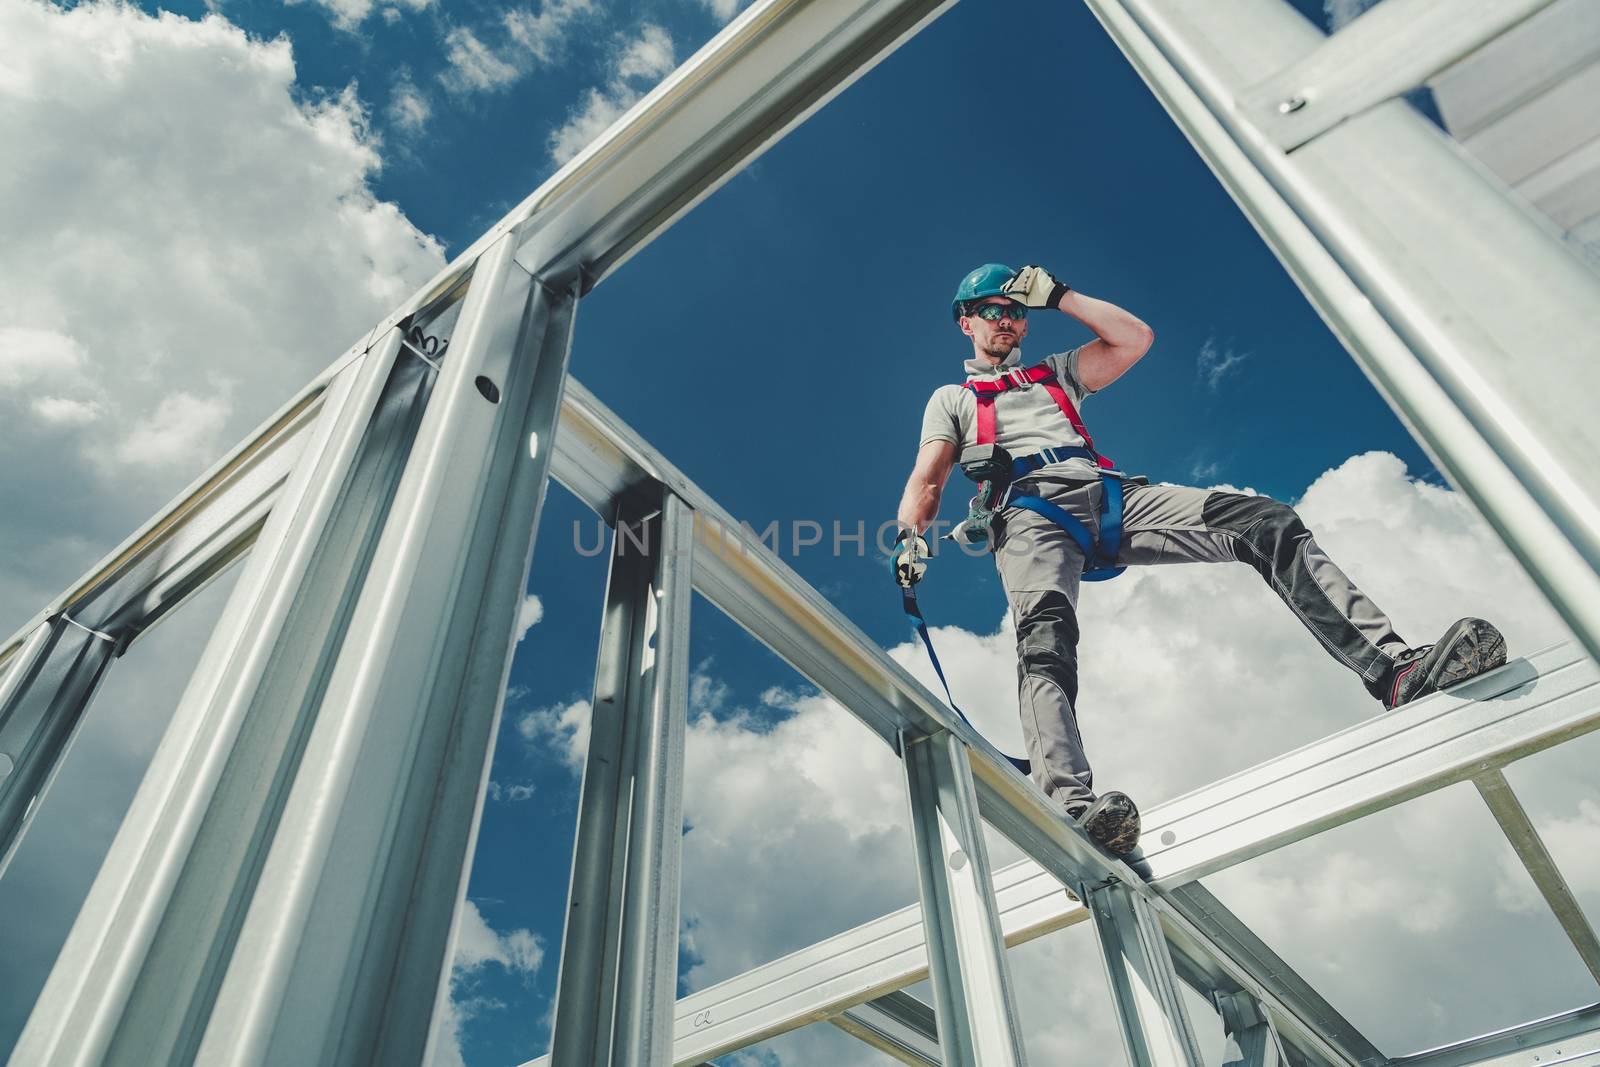 Shock Absorbing Lanyard and Safety Harness Equipment. Work at Height Safety. Caucasian Contractor on a Steel Building Frame.